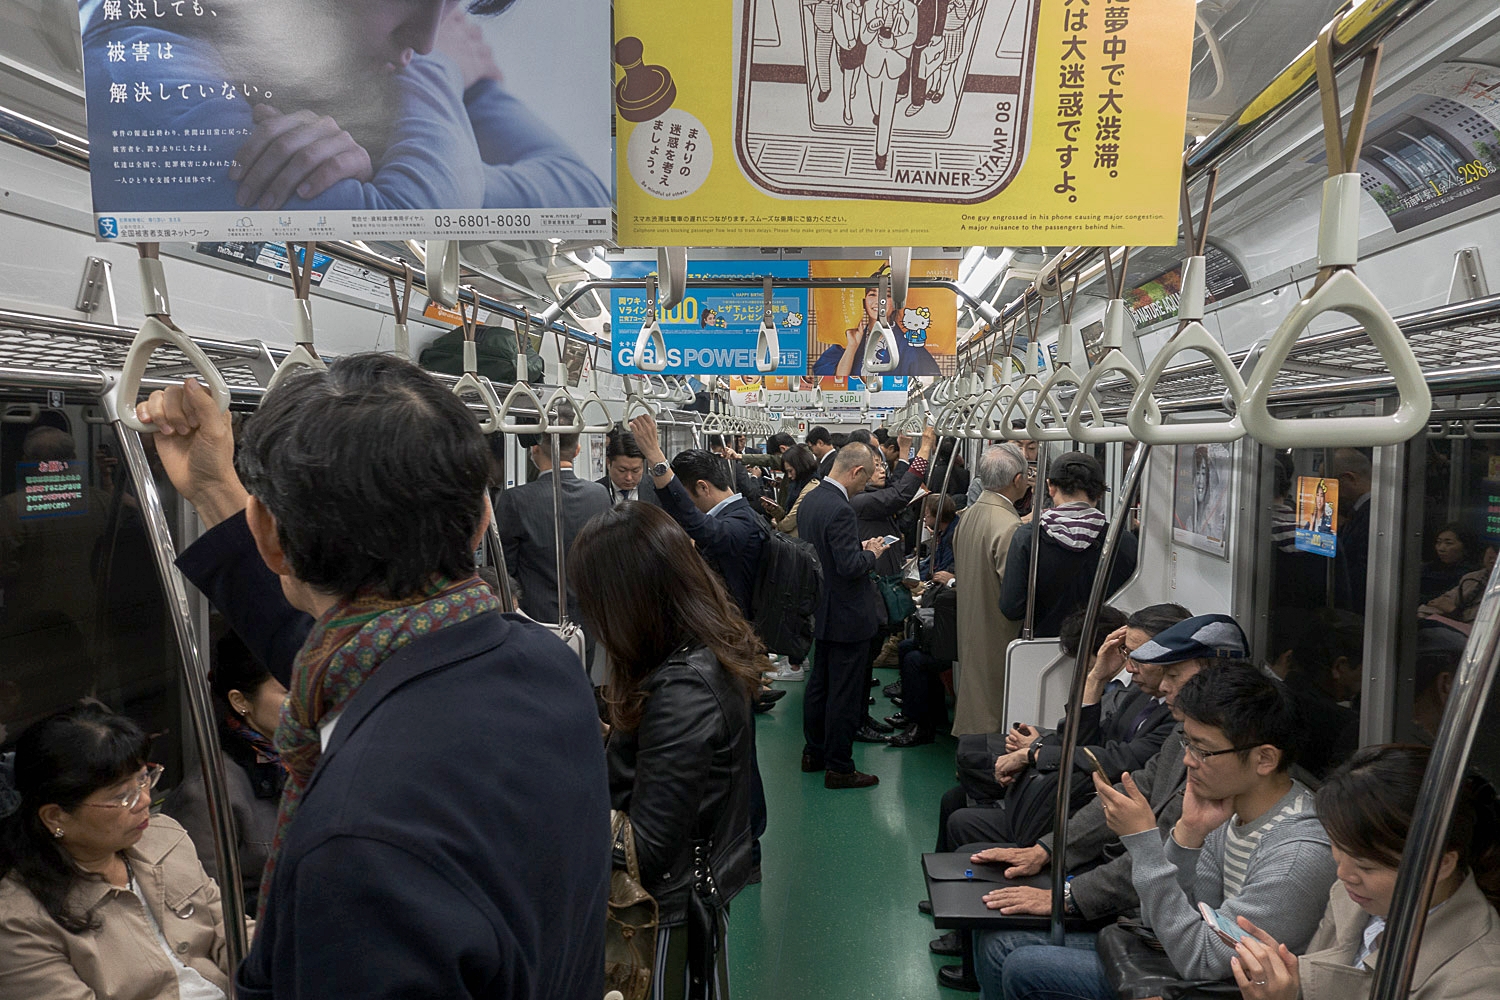 Tough Day, Commuters Tokyo